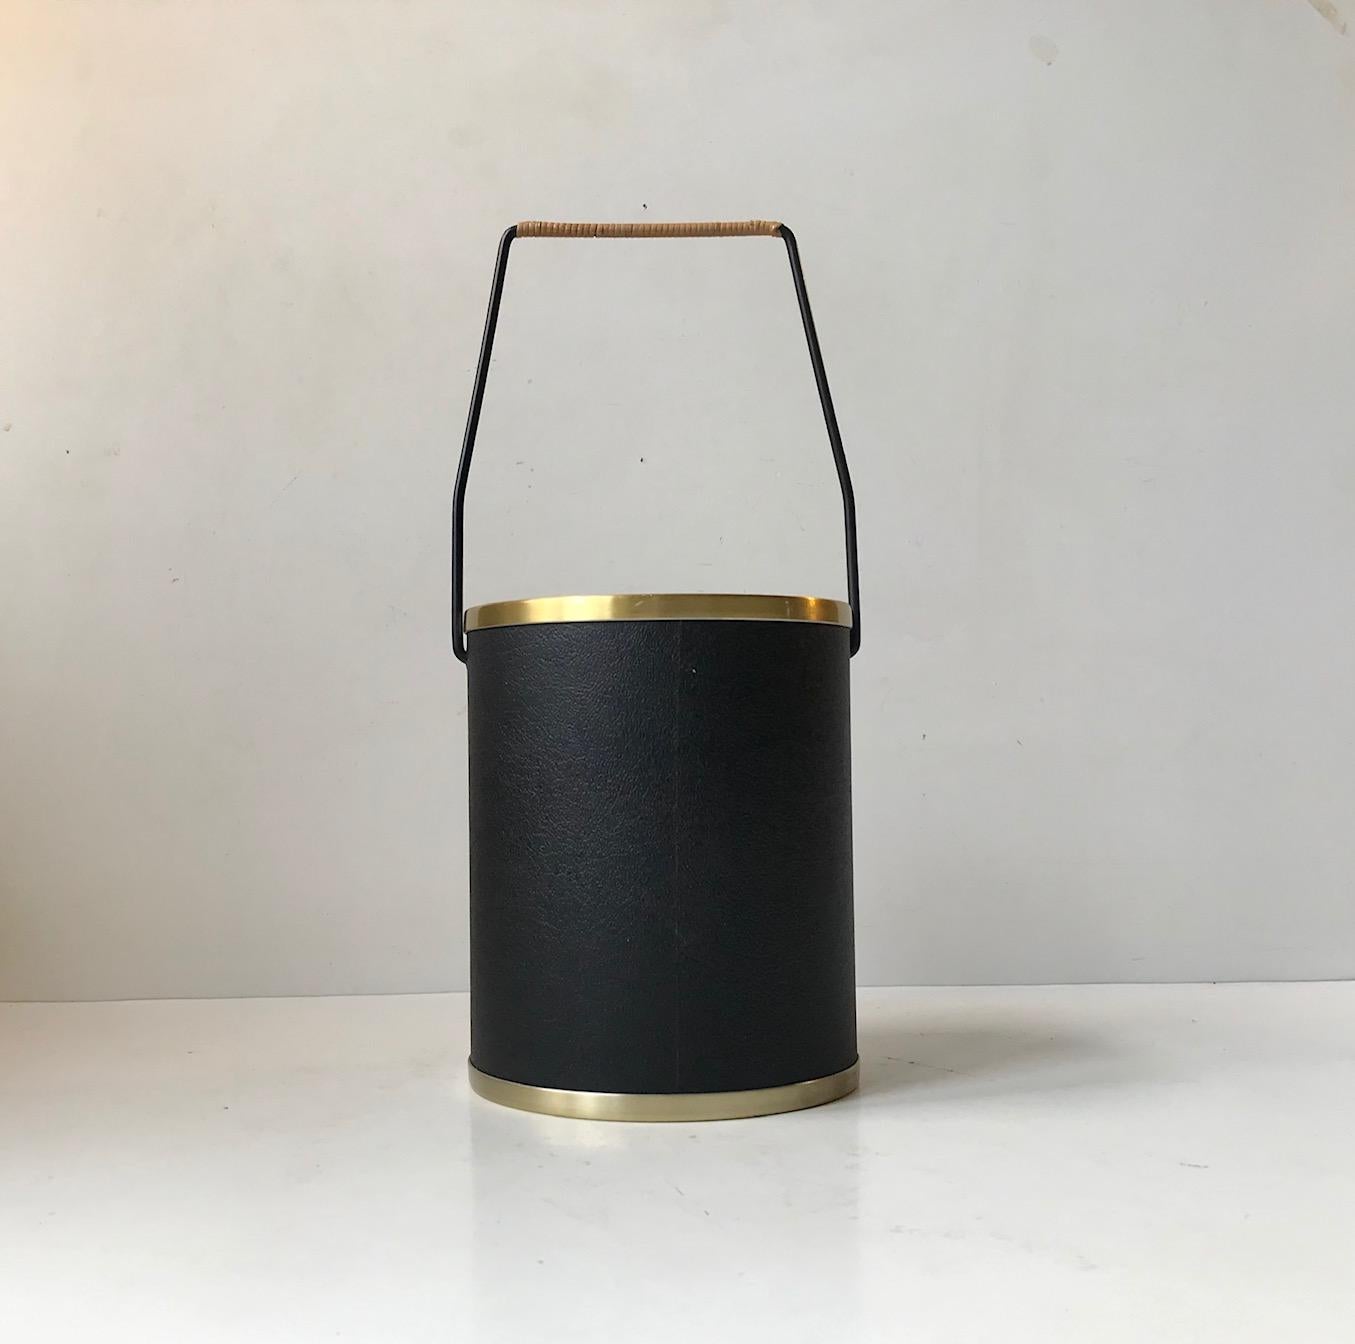 A stylized 1960s wine or champagne cooler. It is executed in brass-alloy aluminium, faux black leather and has a steel handle with rattan work. The sides features a thermos inlay so no ice is required to keep it cool. 
It was designed and